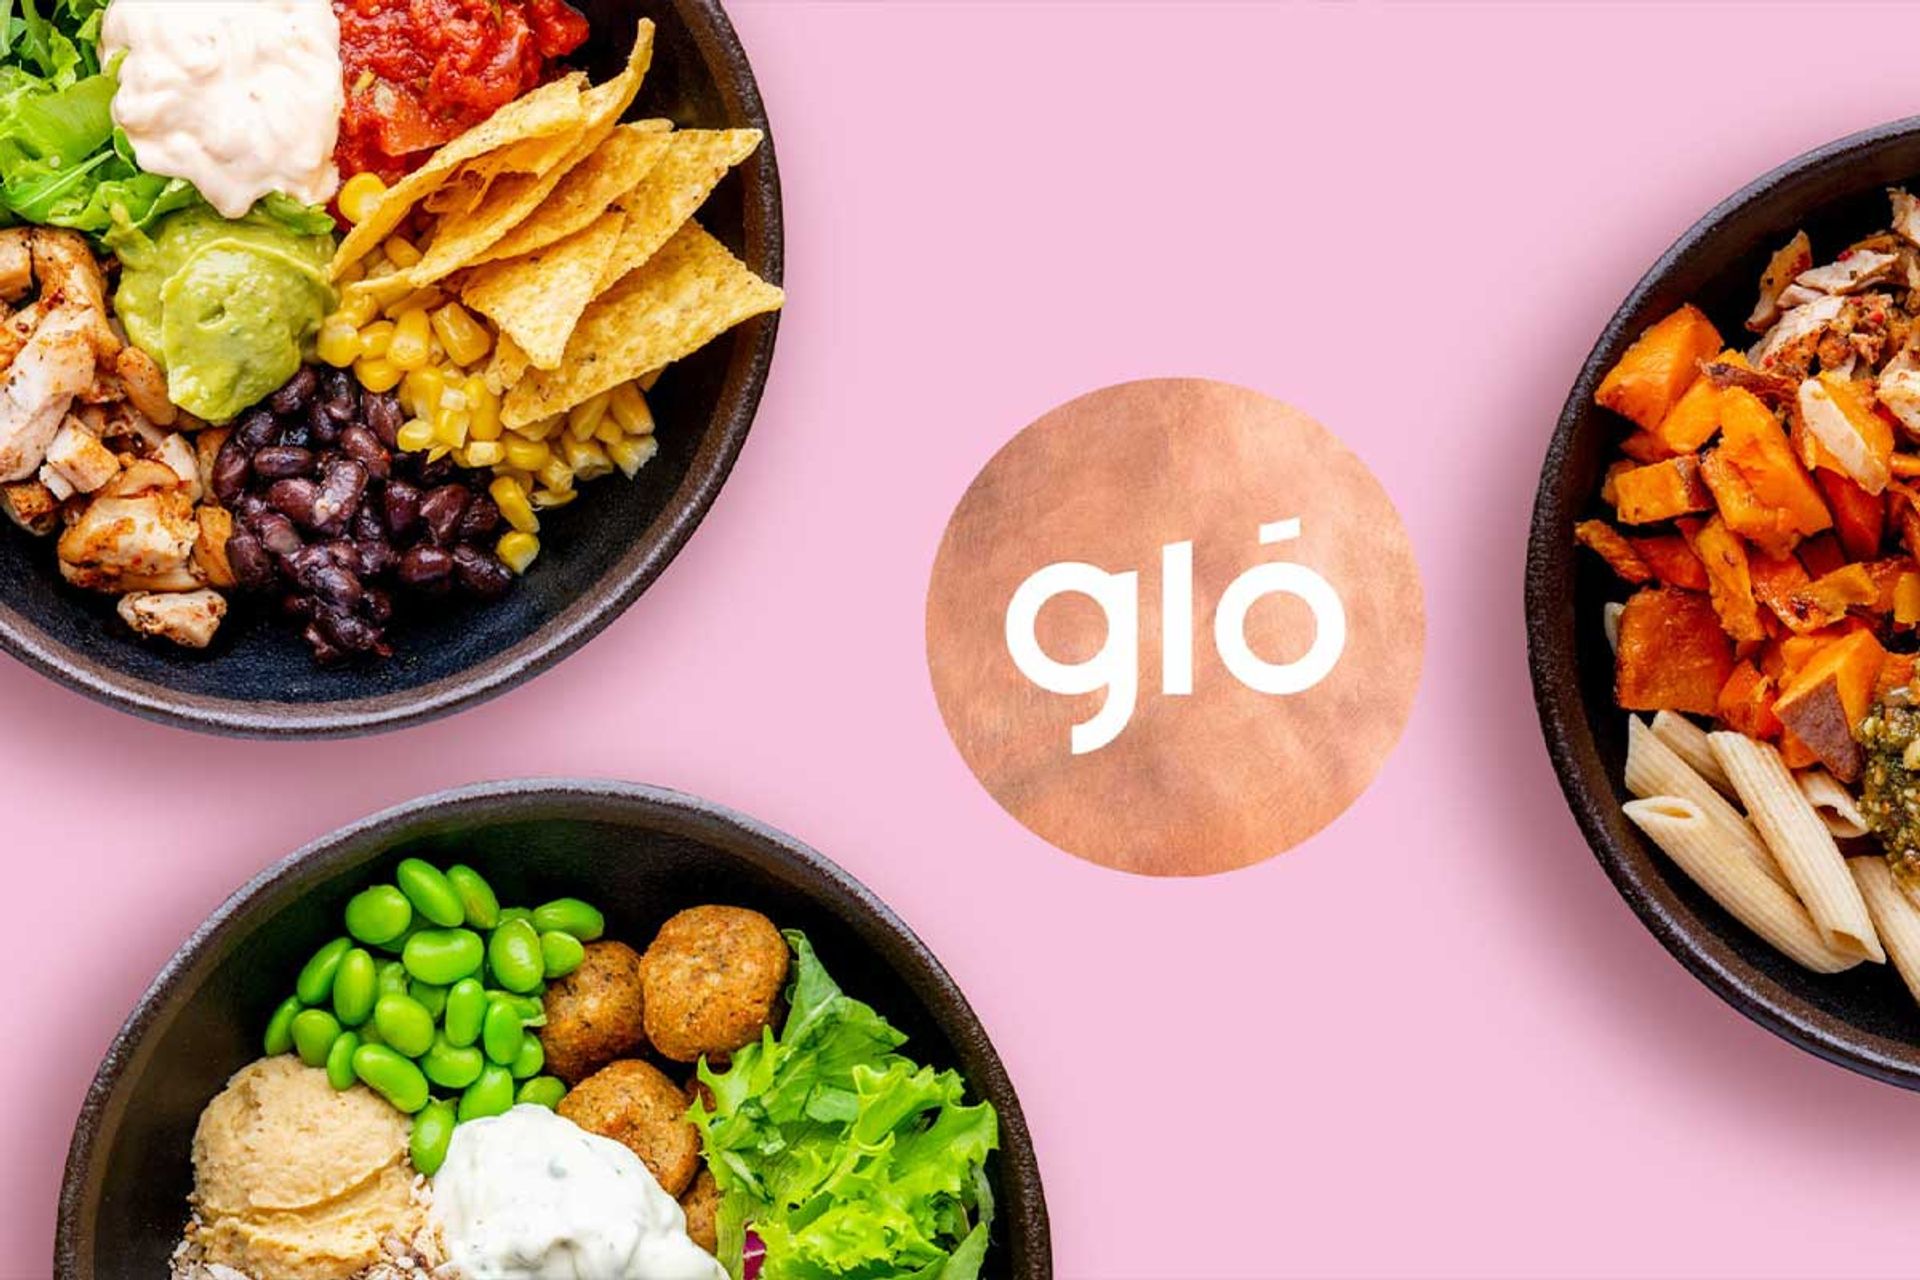 Gló in Iceland